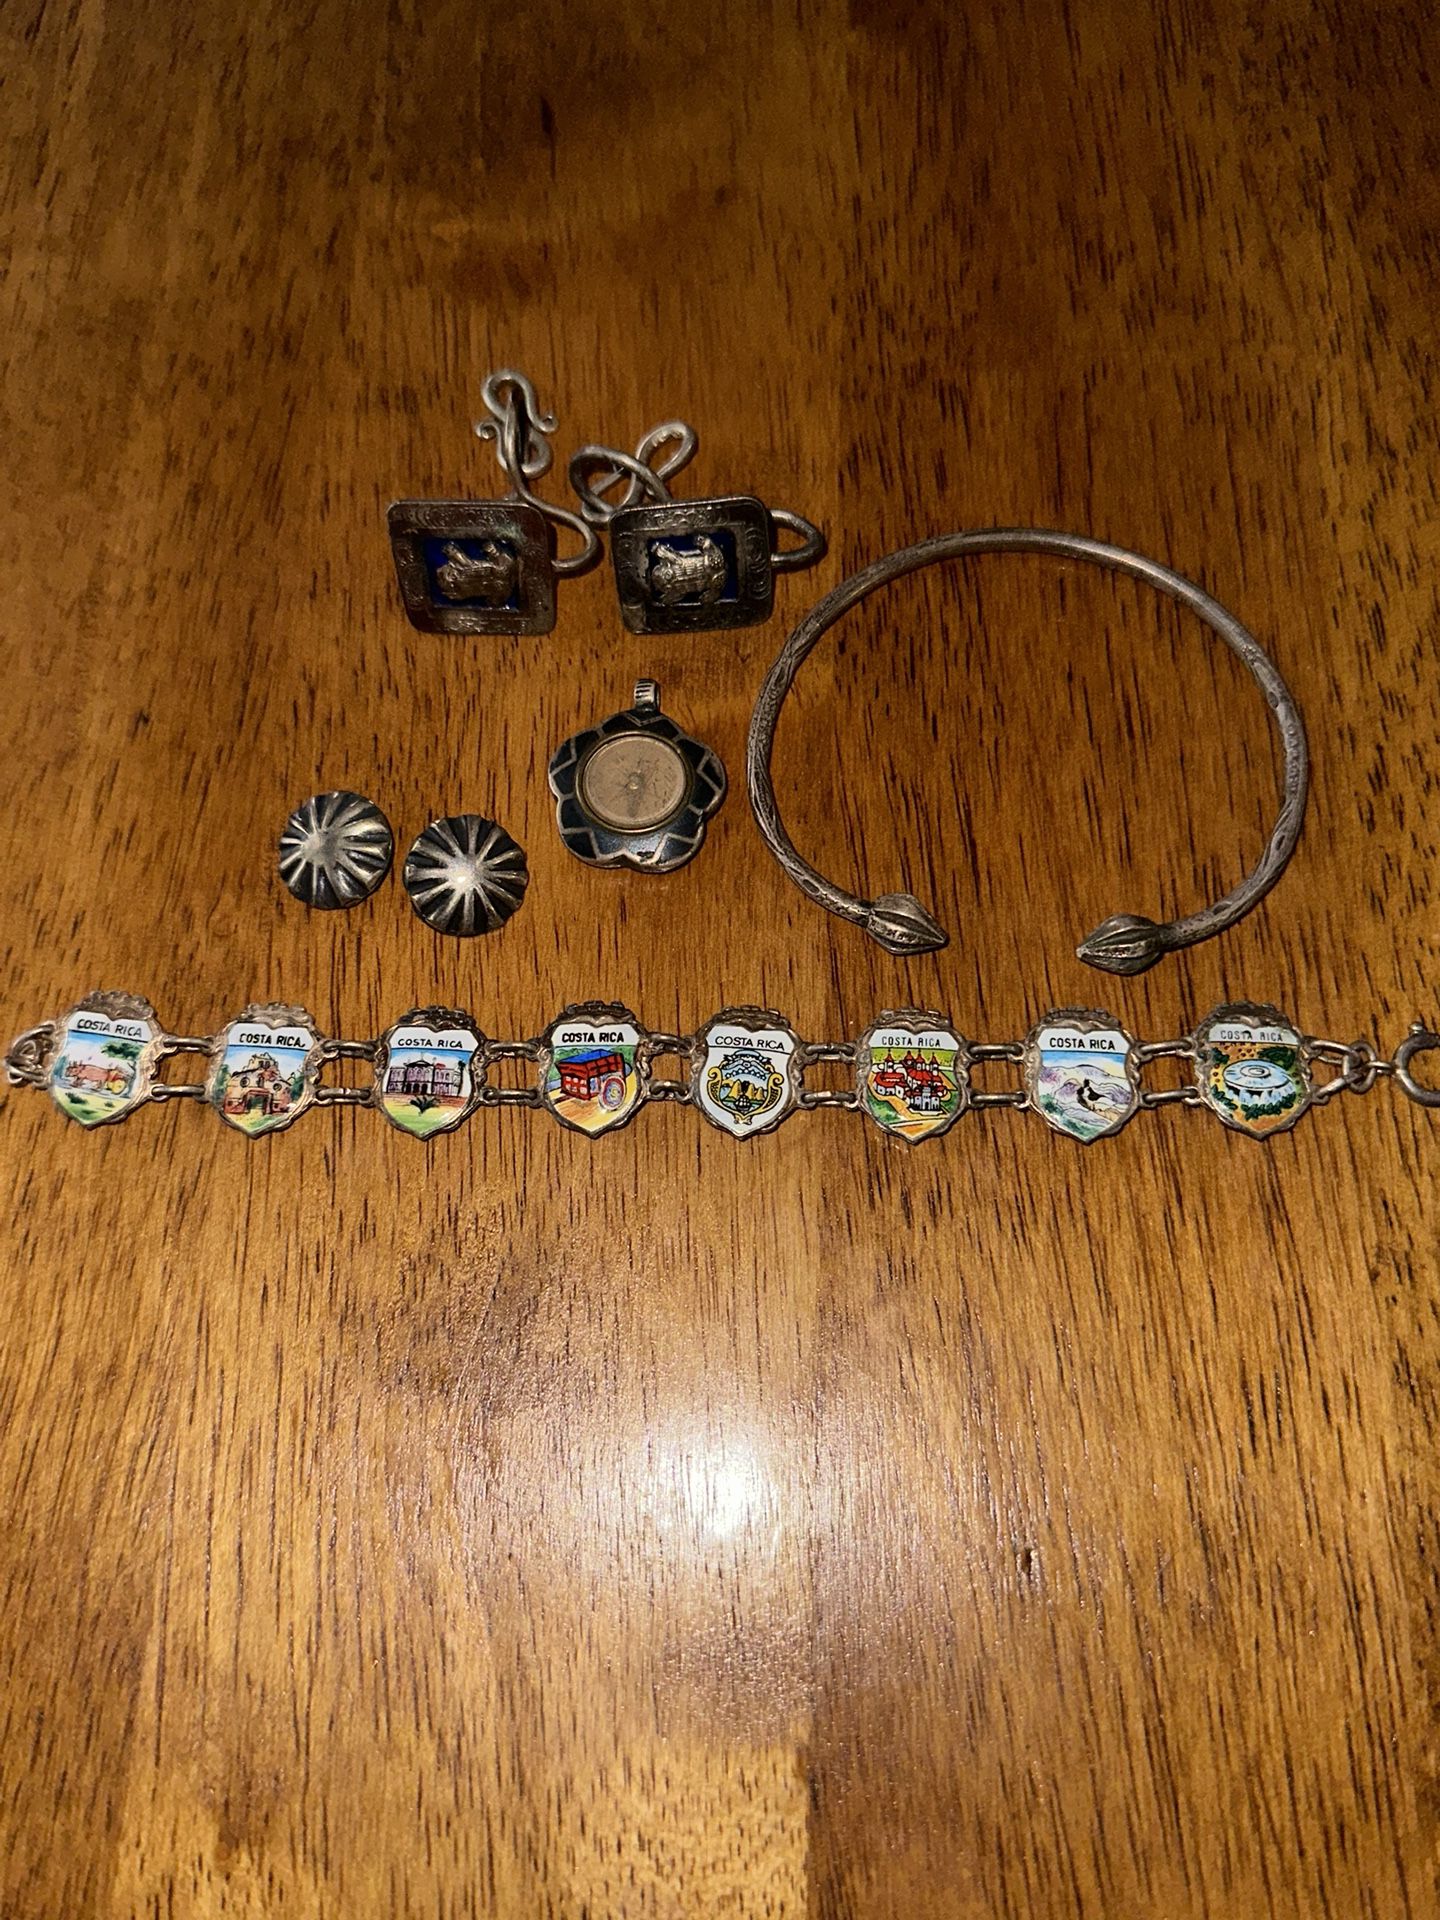 Vintage sterling silver Lot jewelry